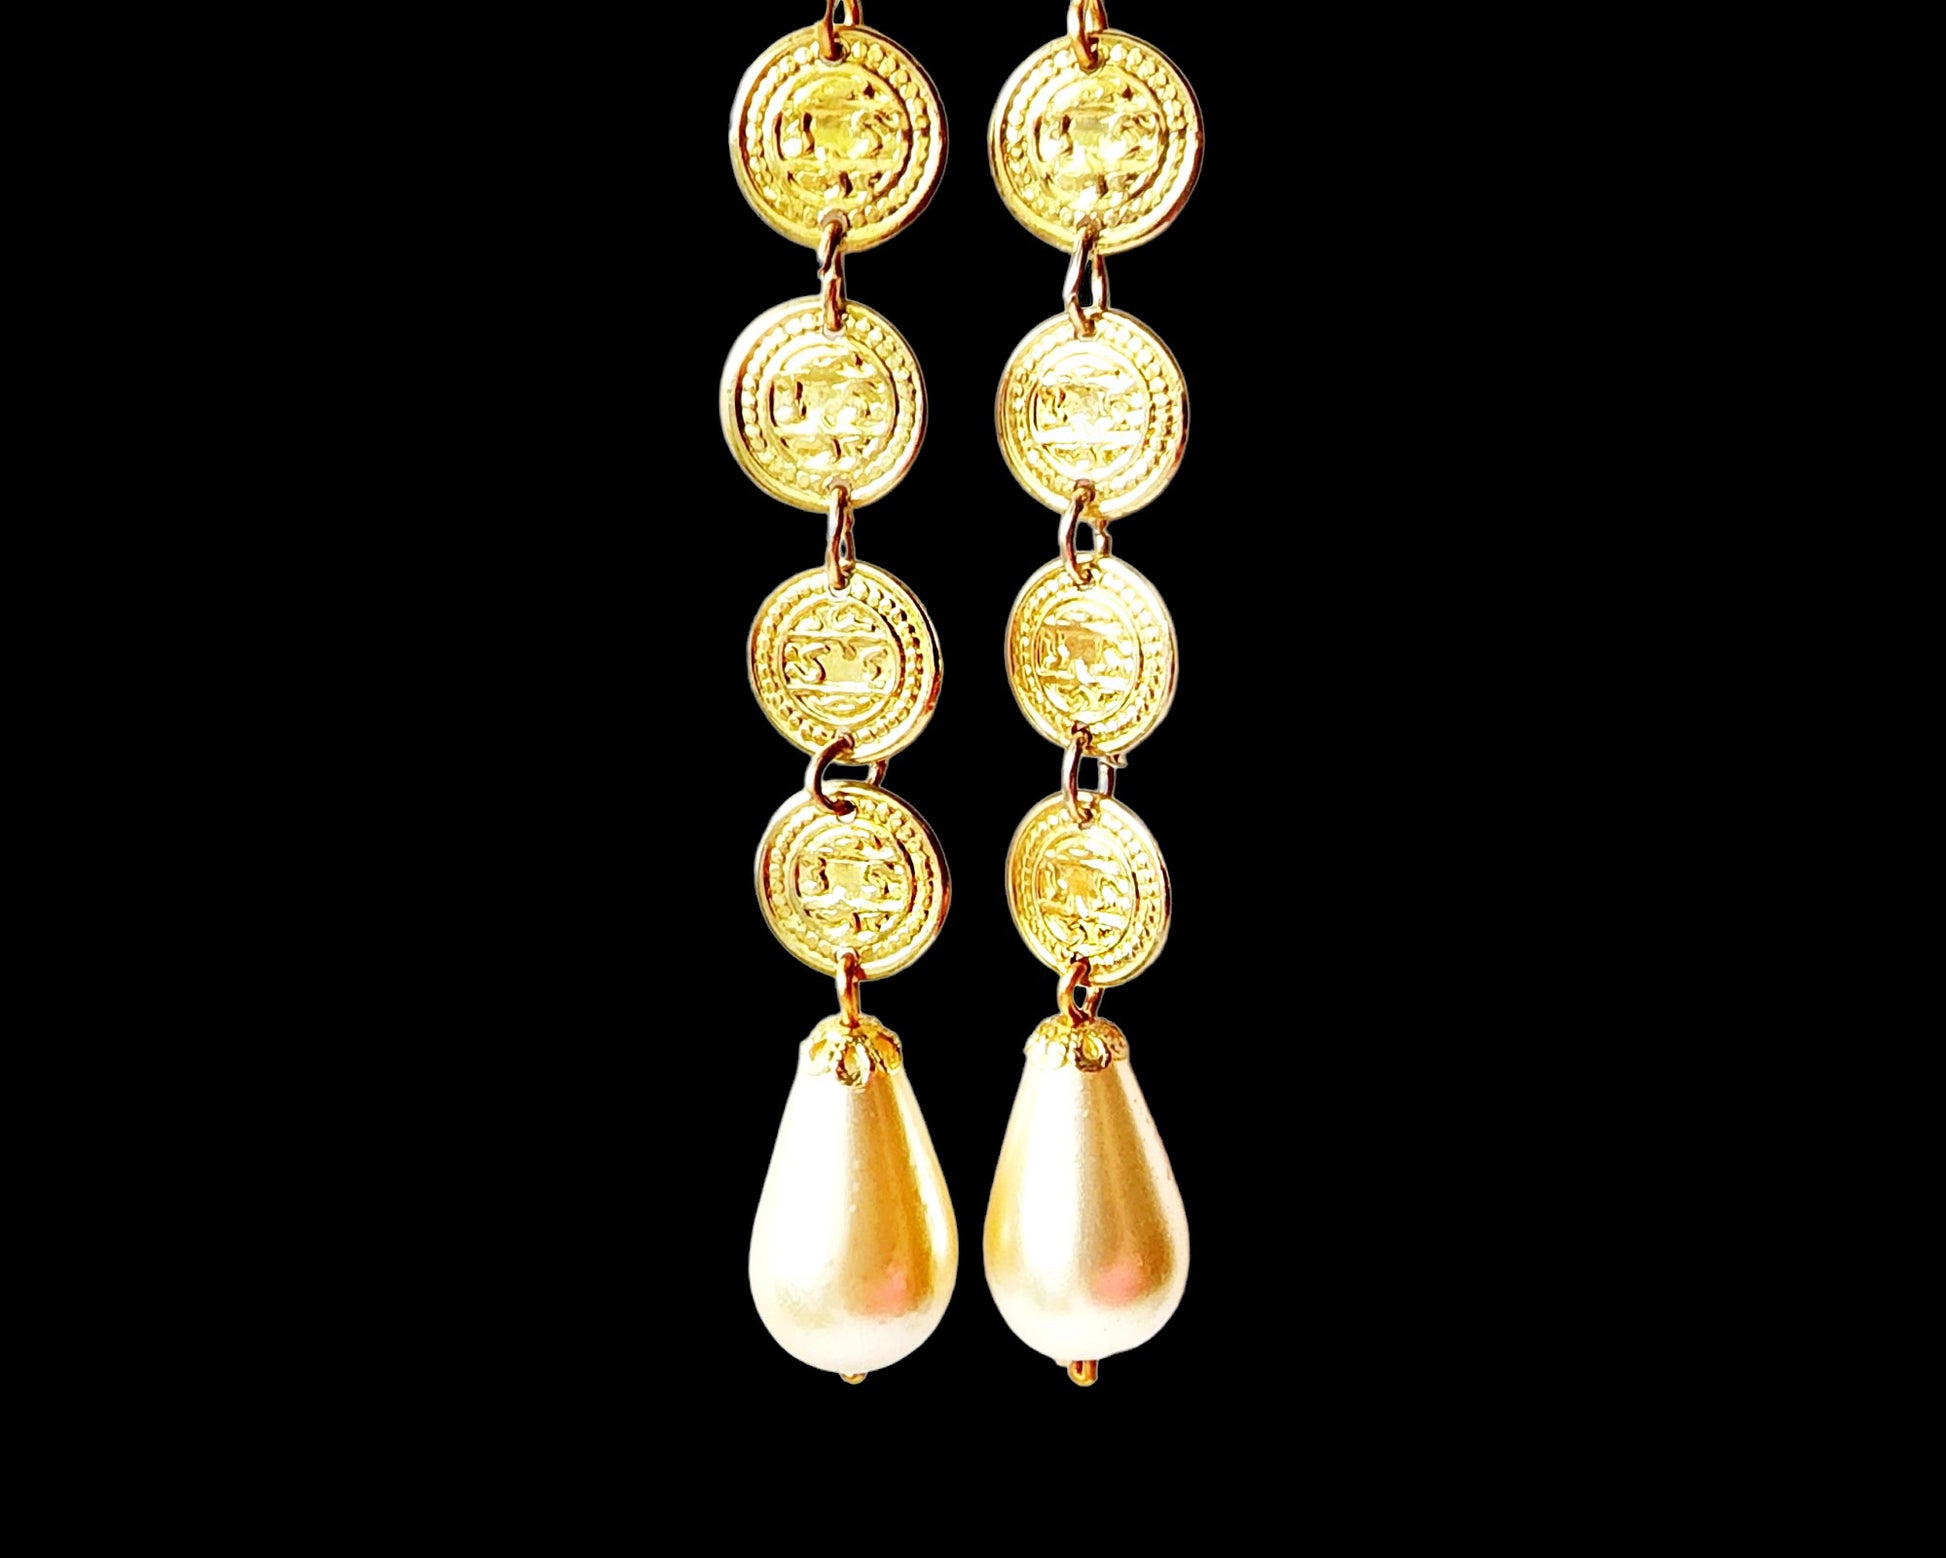 Boho Chic Long Coin Pearl Earrings, large white drop shaped cream color faux pearls dangle beneath a stream of four gold coils. 